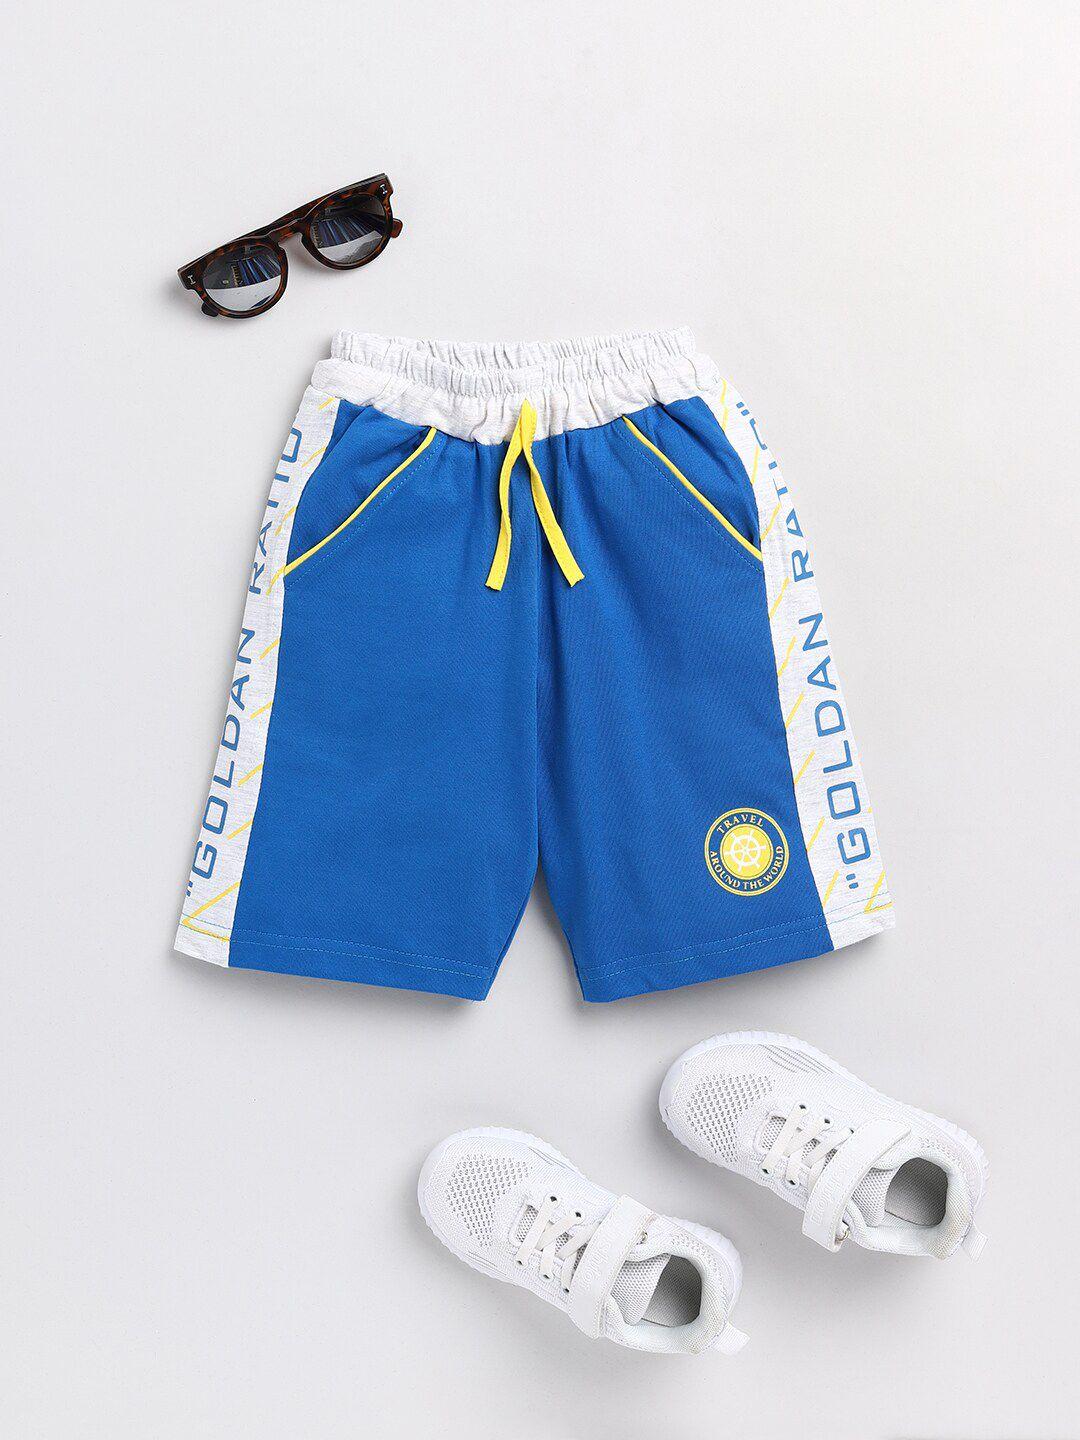 todd n teen boys blue & white typography printed cotton shorts